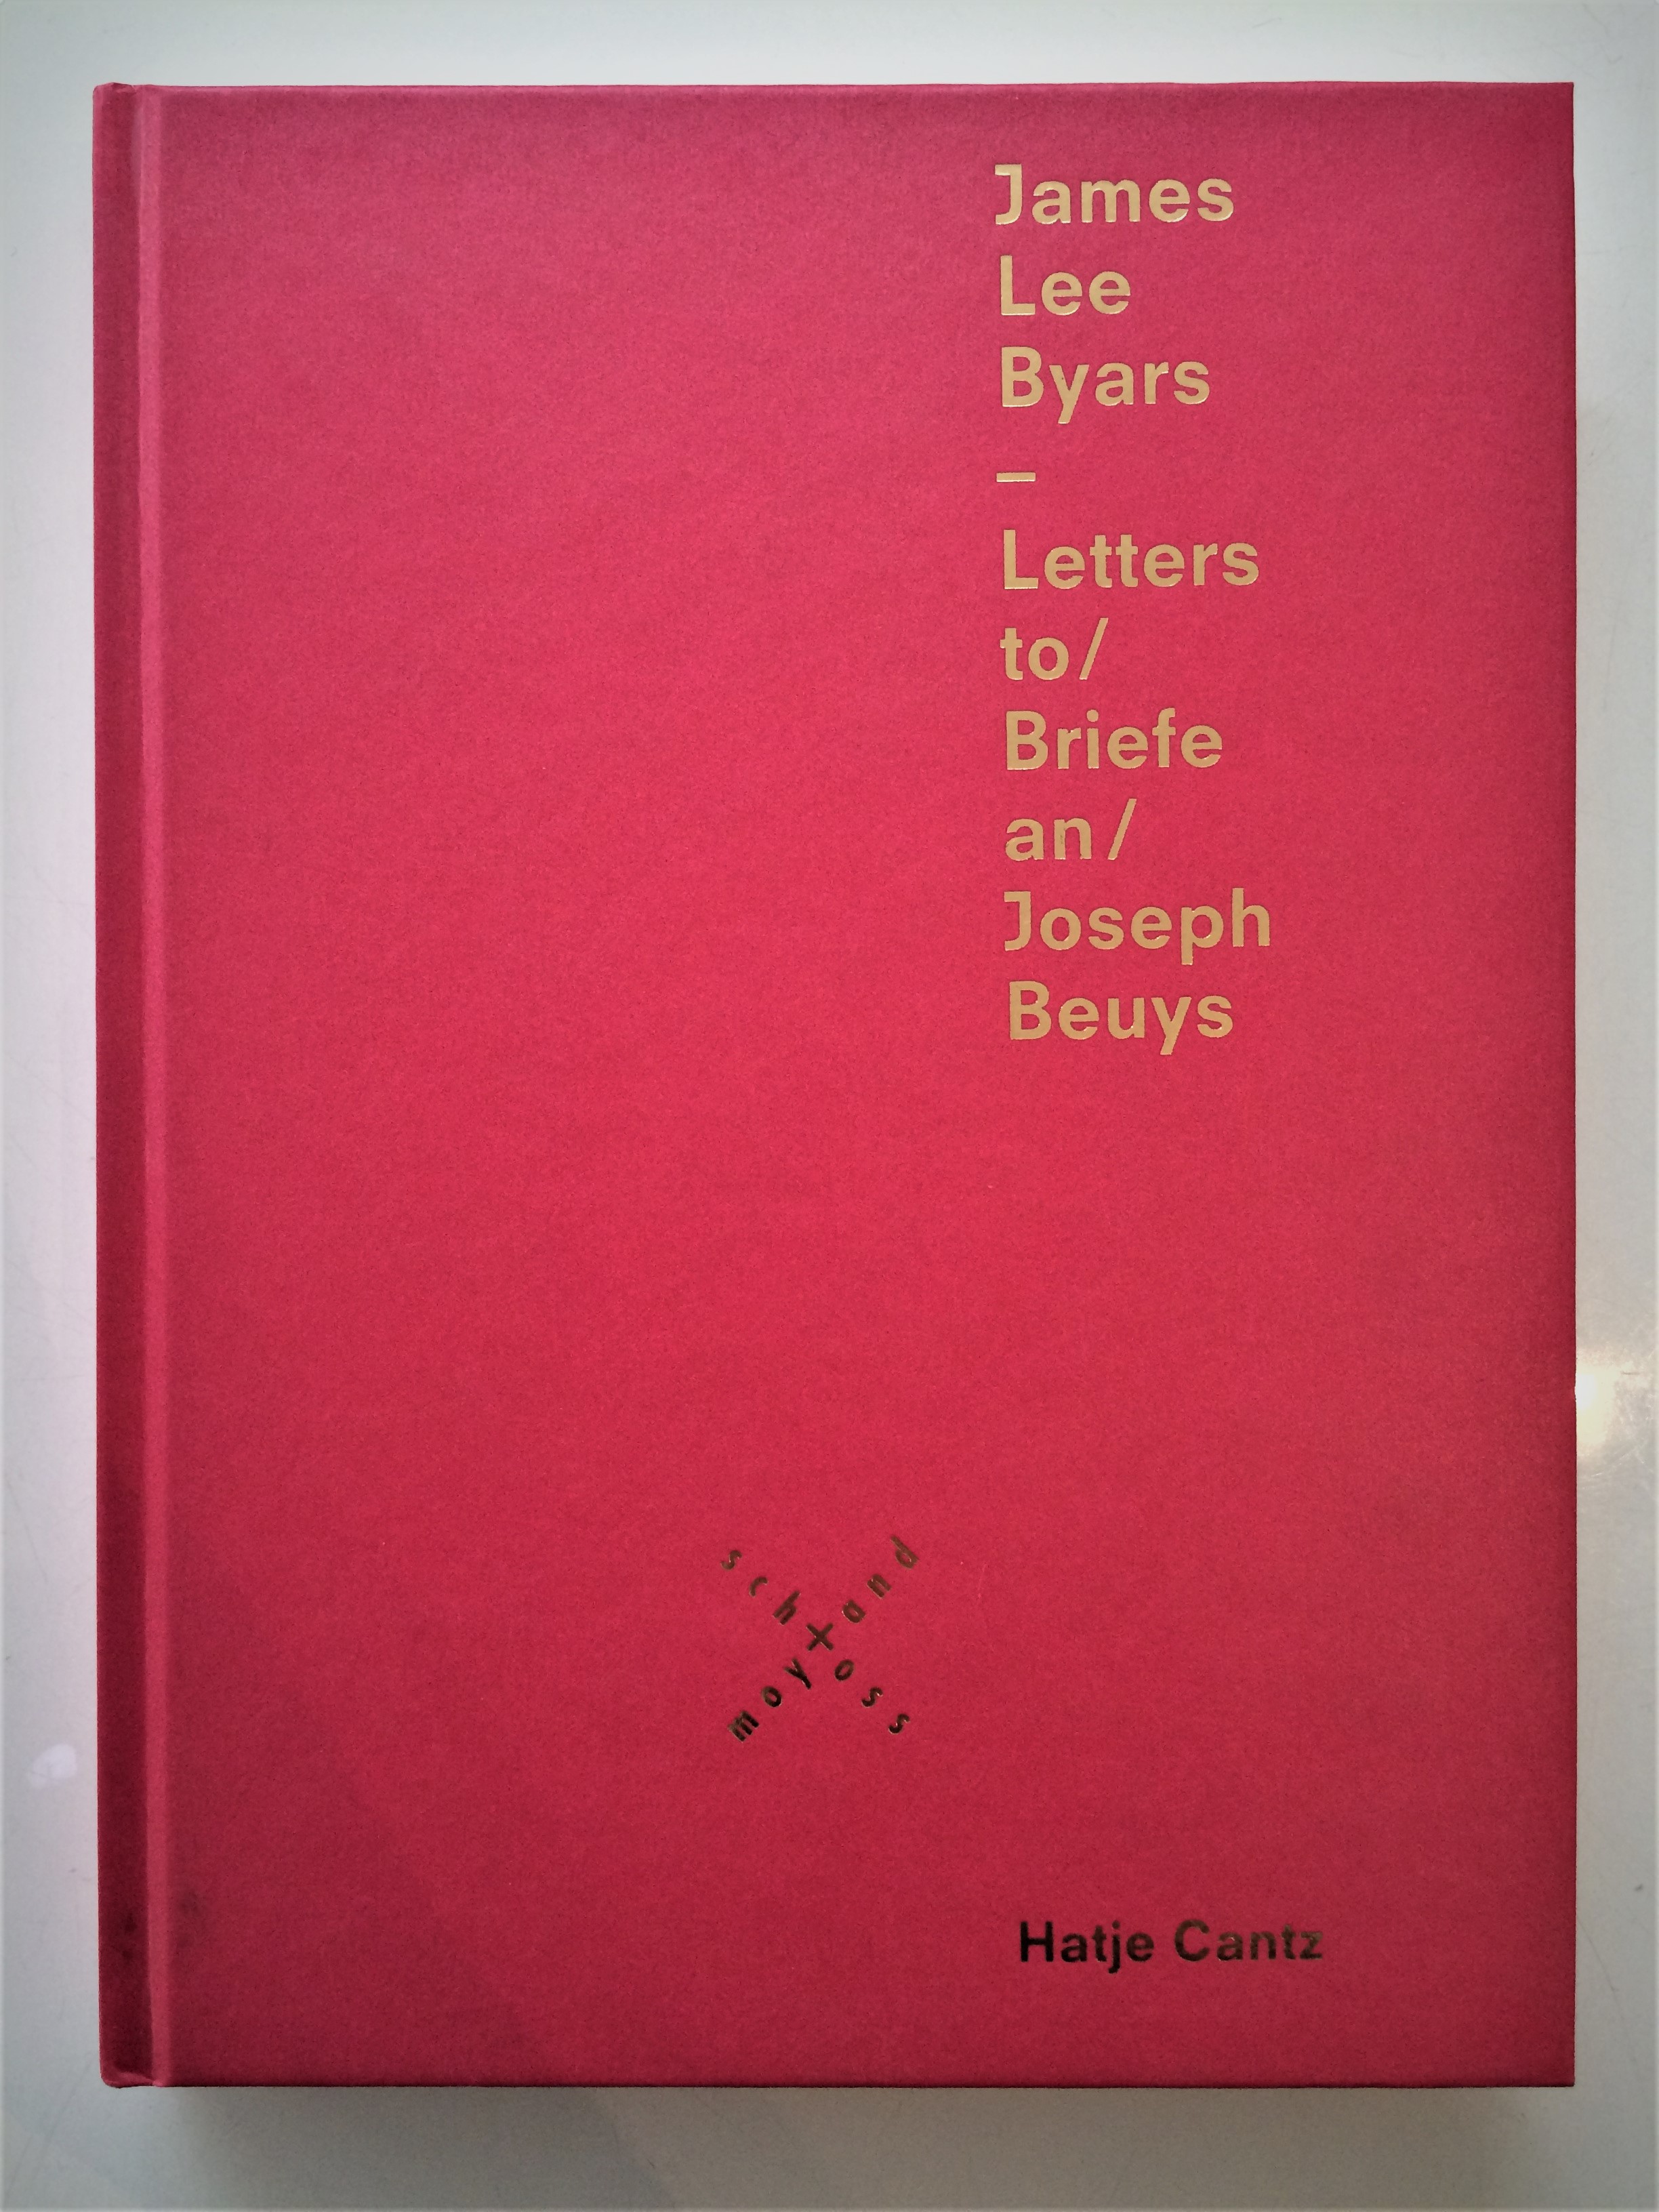 James-Lee-Byars-Letters-to--Brief-an--Joseph-Beuys